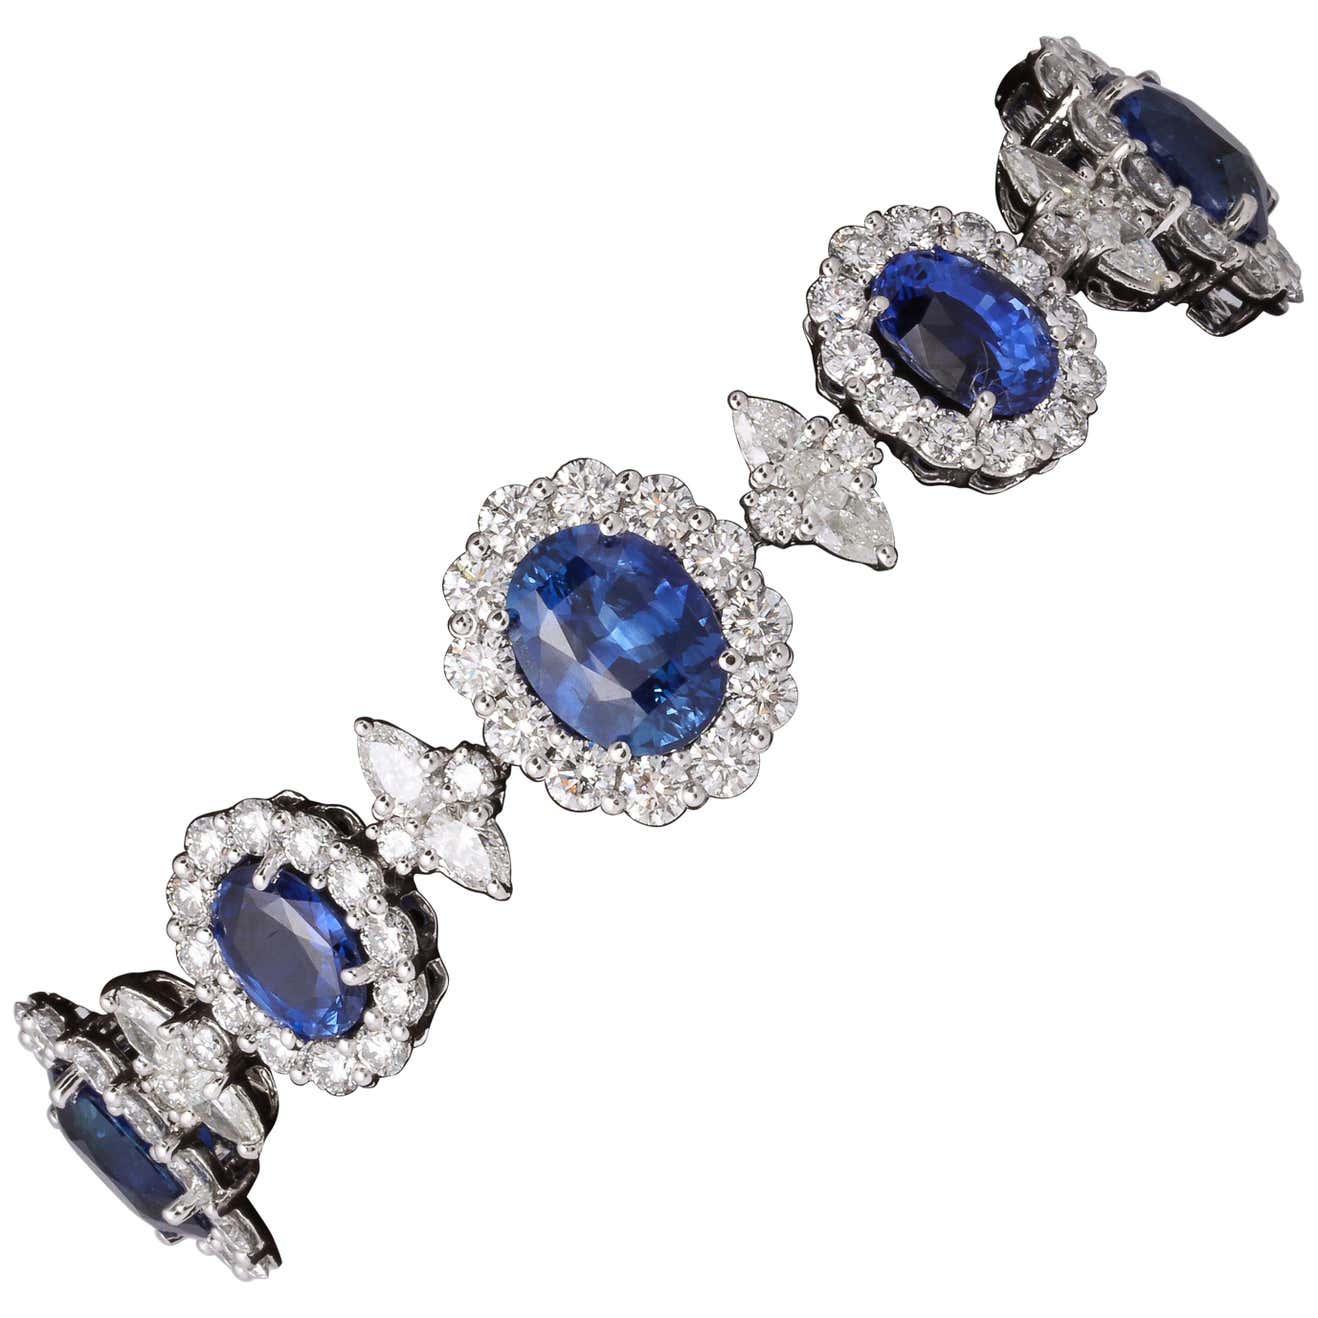 Blue Sapphire and Diamond Bracelet For Sale at 1stDibs